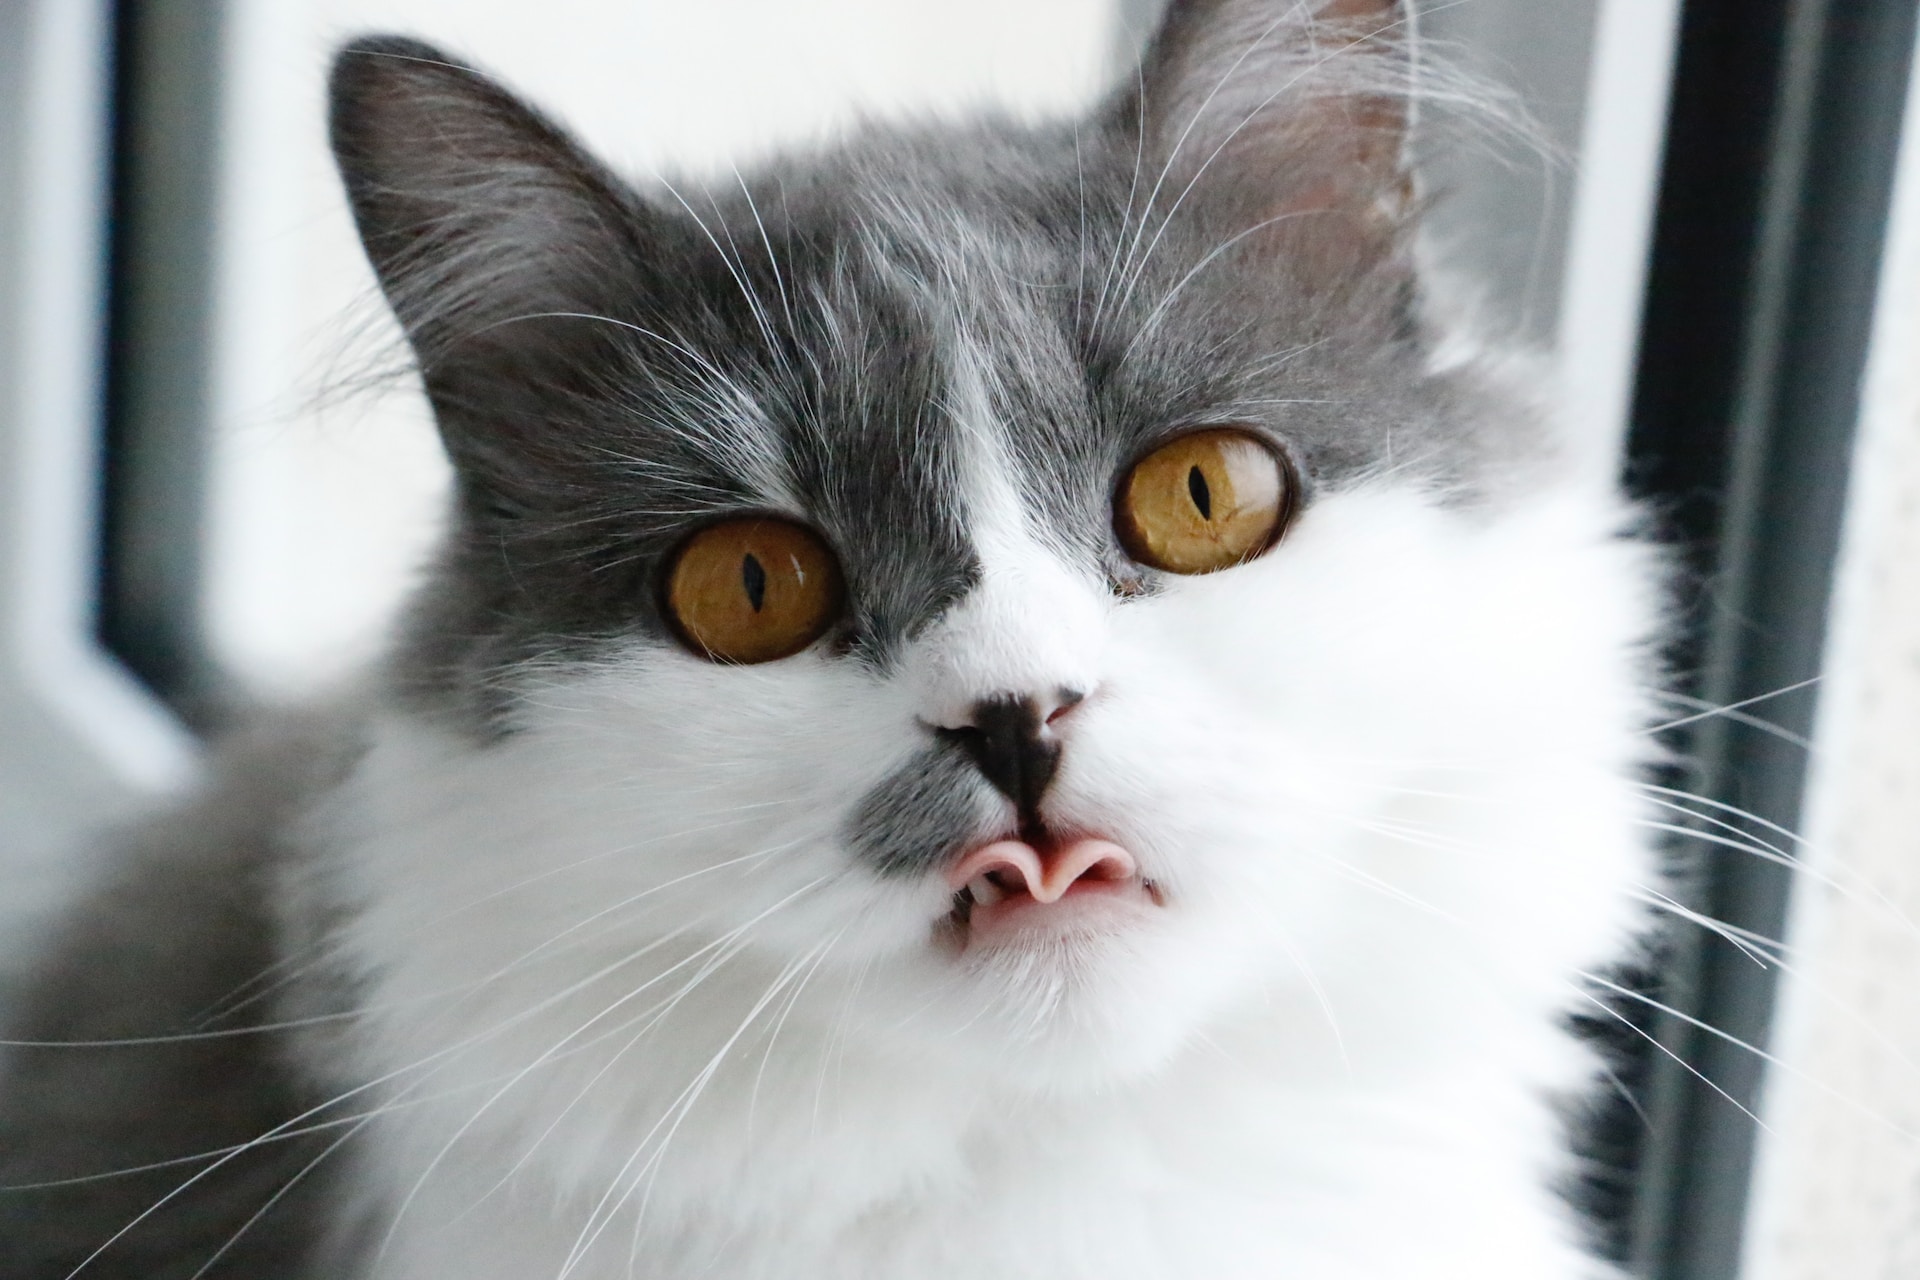 A close up of a cat showing it's tongue.